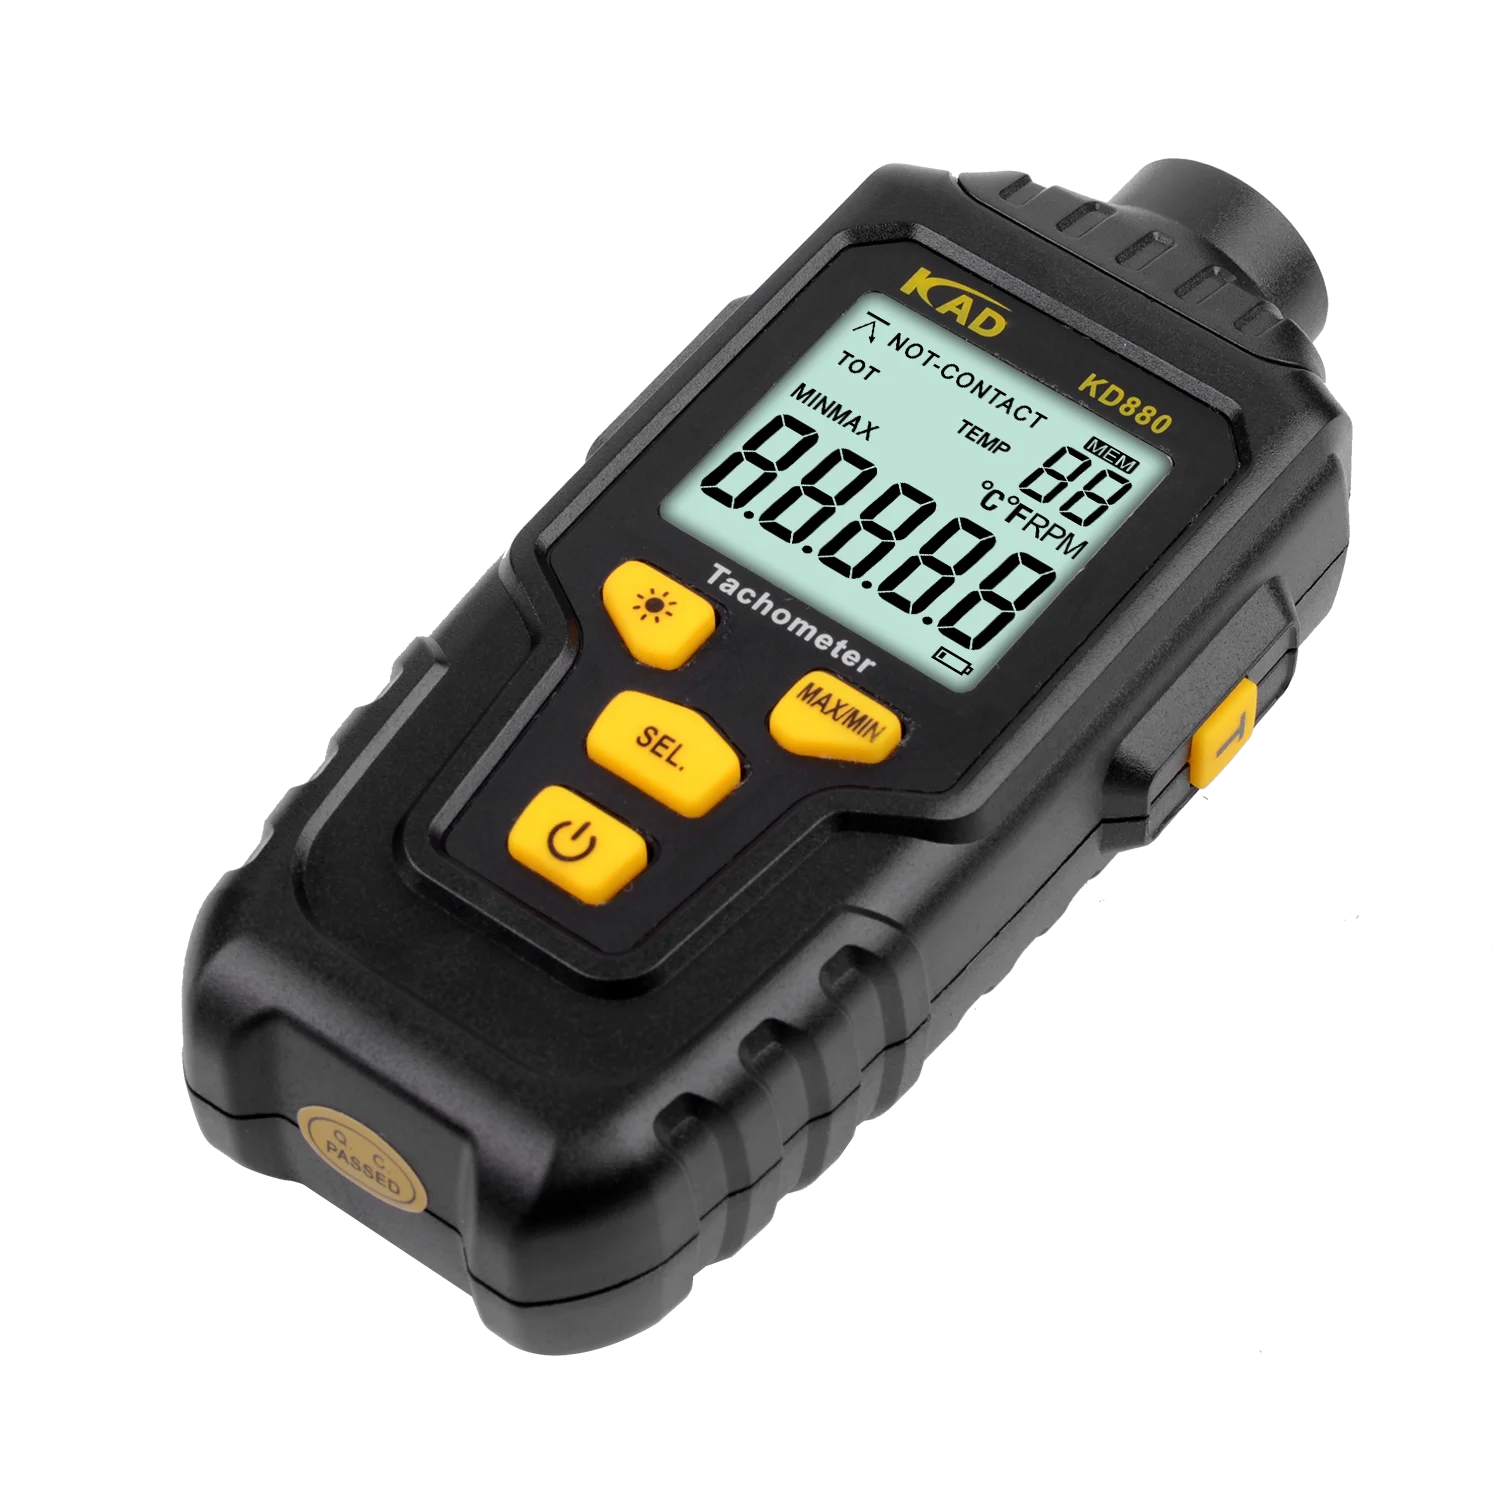 

Digital Non-Contact Laser Tachometer Wide Range 0.1~99999PRM Rotational Speed Distance Temperature Meter with Backlight